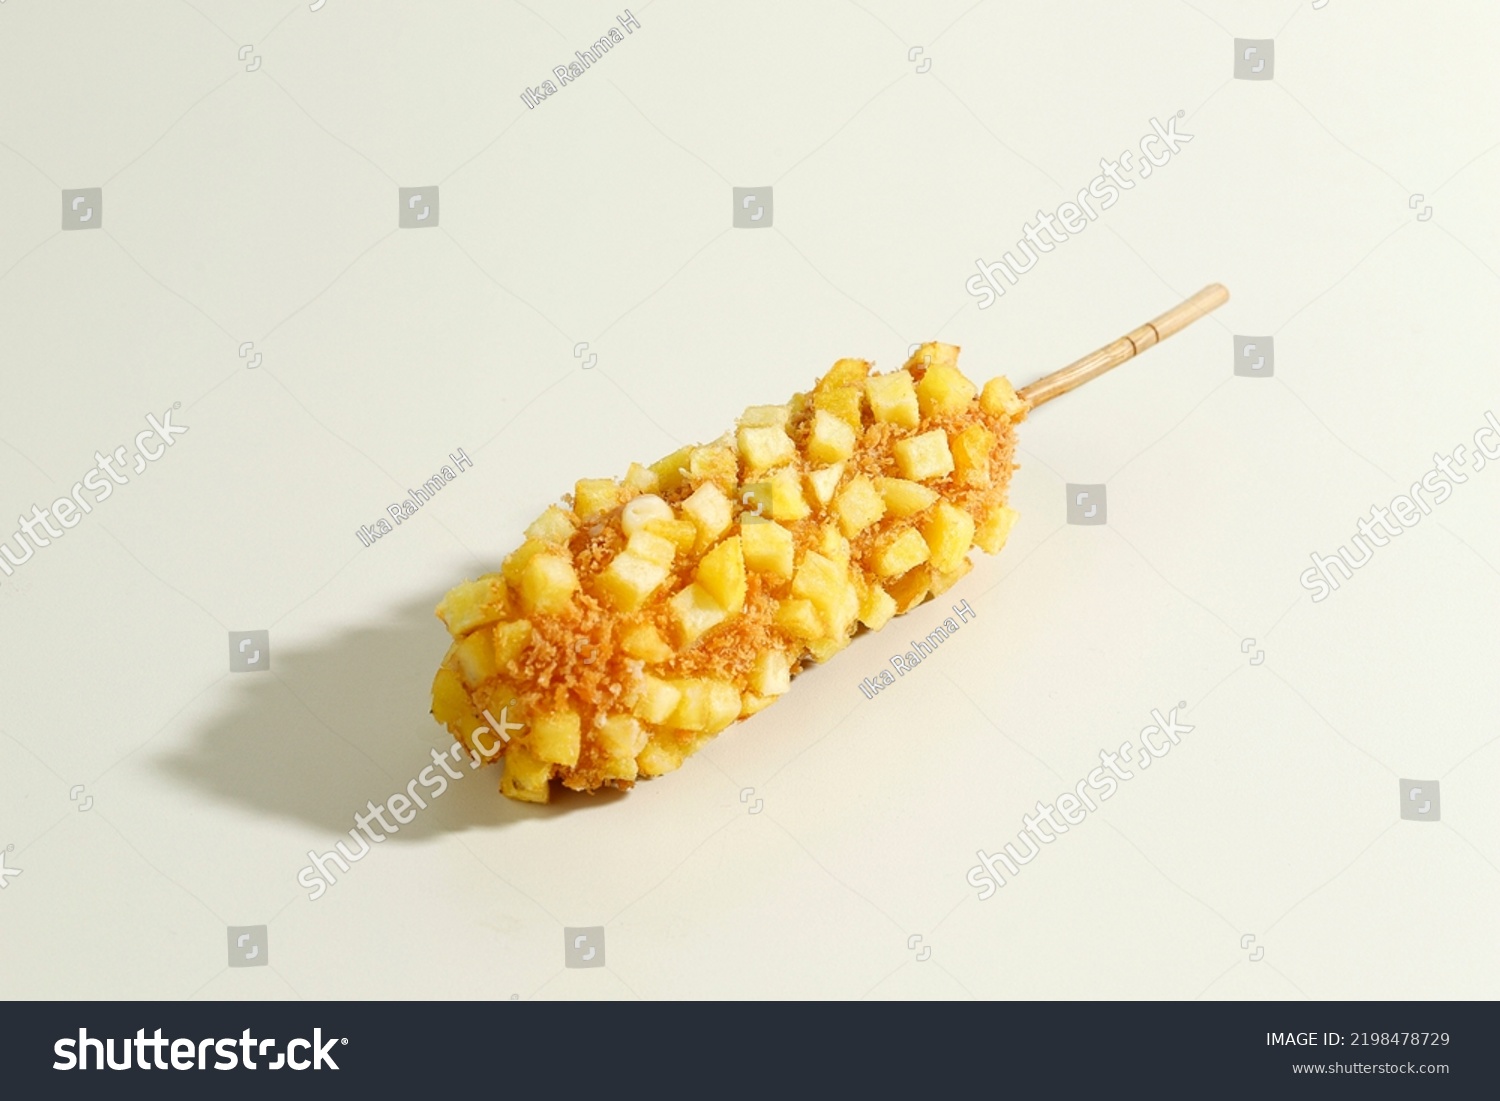 Delicious Crunchy Korean Style Chunky Potato Corn Dogs with Batter and Fried Potatoes. Isolated on Cream Background with Copy Space for Text #2198478729